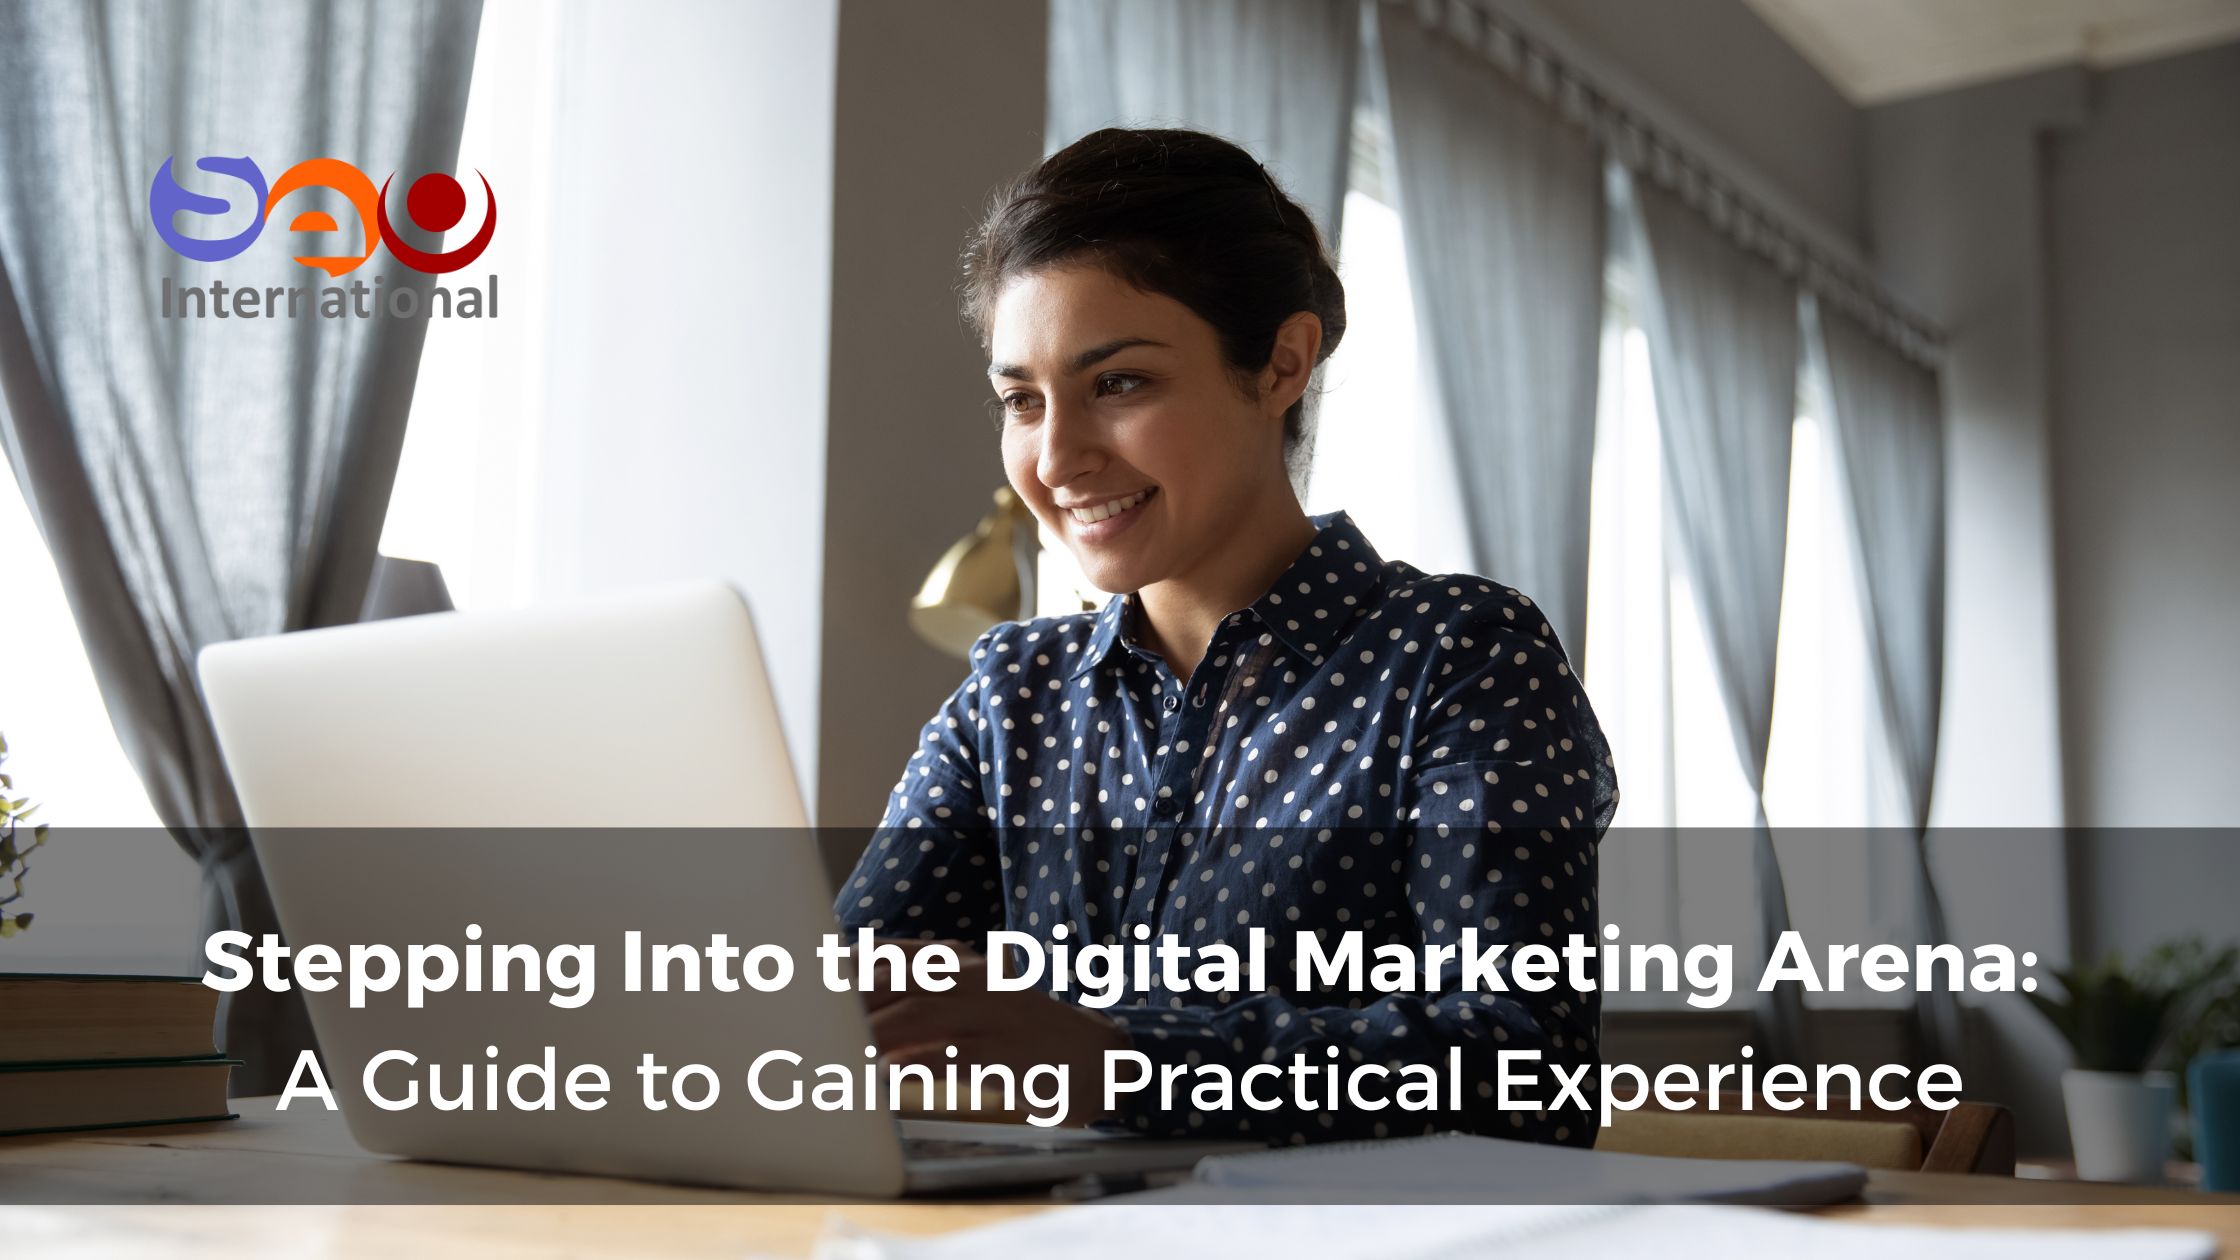 Stepping Into the Digital Marketing Arena: A Guide to Gaining Practical Experience